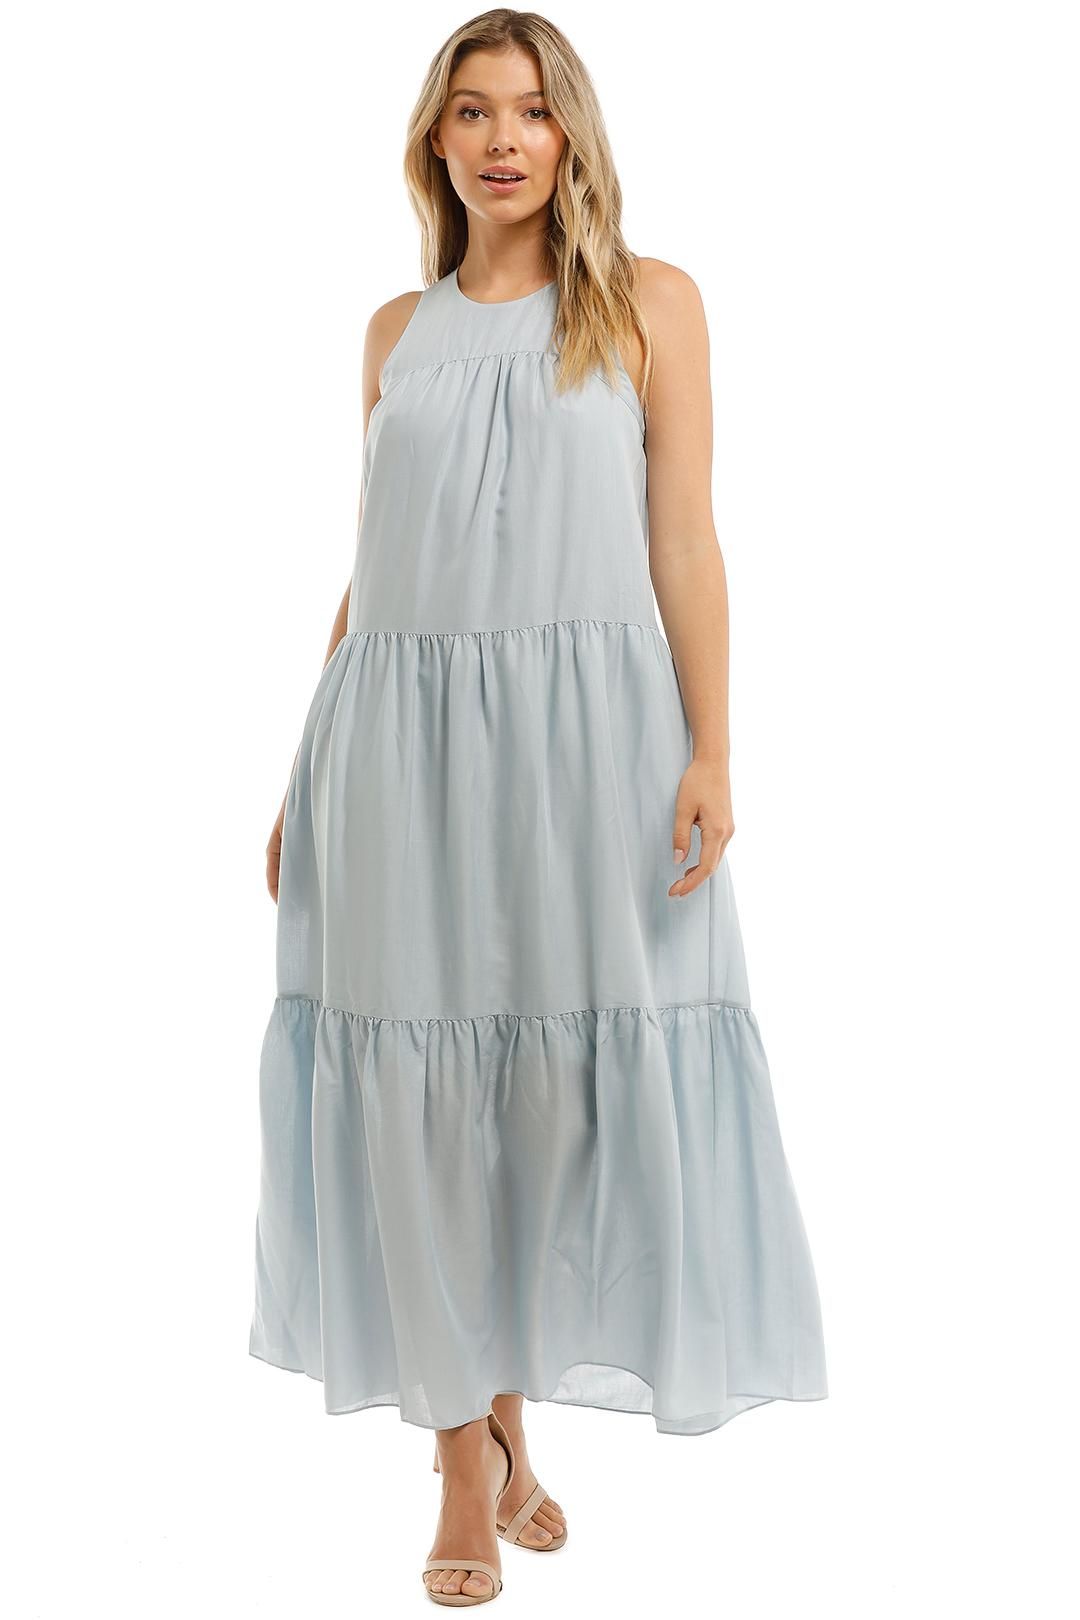 Yoke Tiered Dress in Arctic Blue by Witchery for Hire | GlamCorner